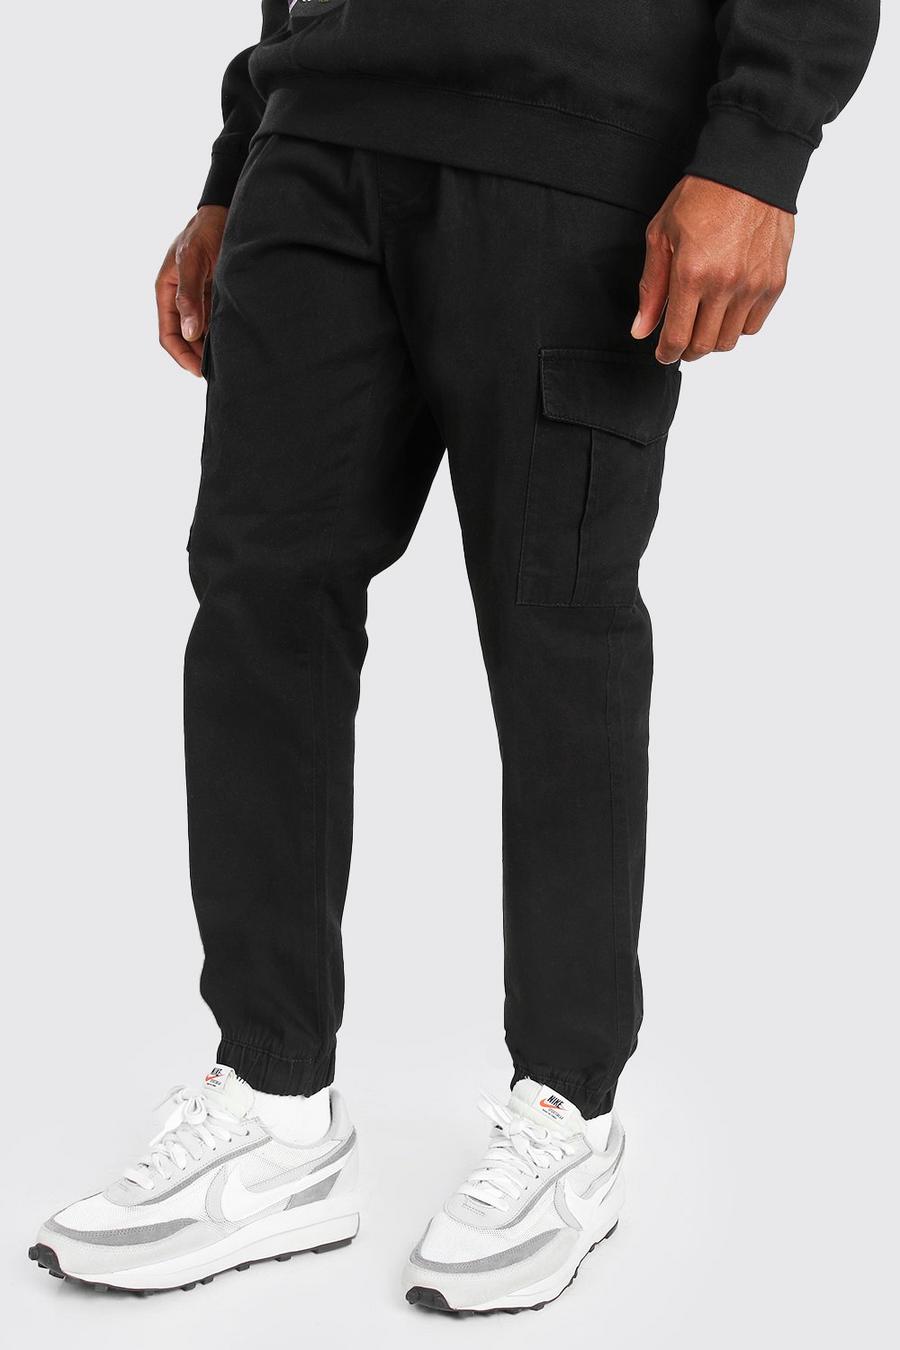 Black Cargo Pants With Elasticated Waist image number 1